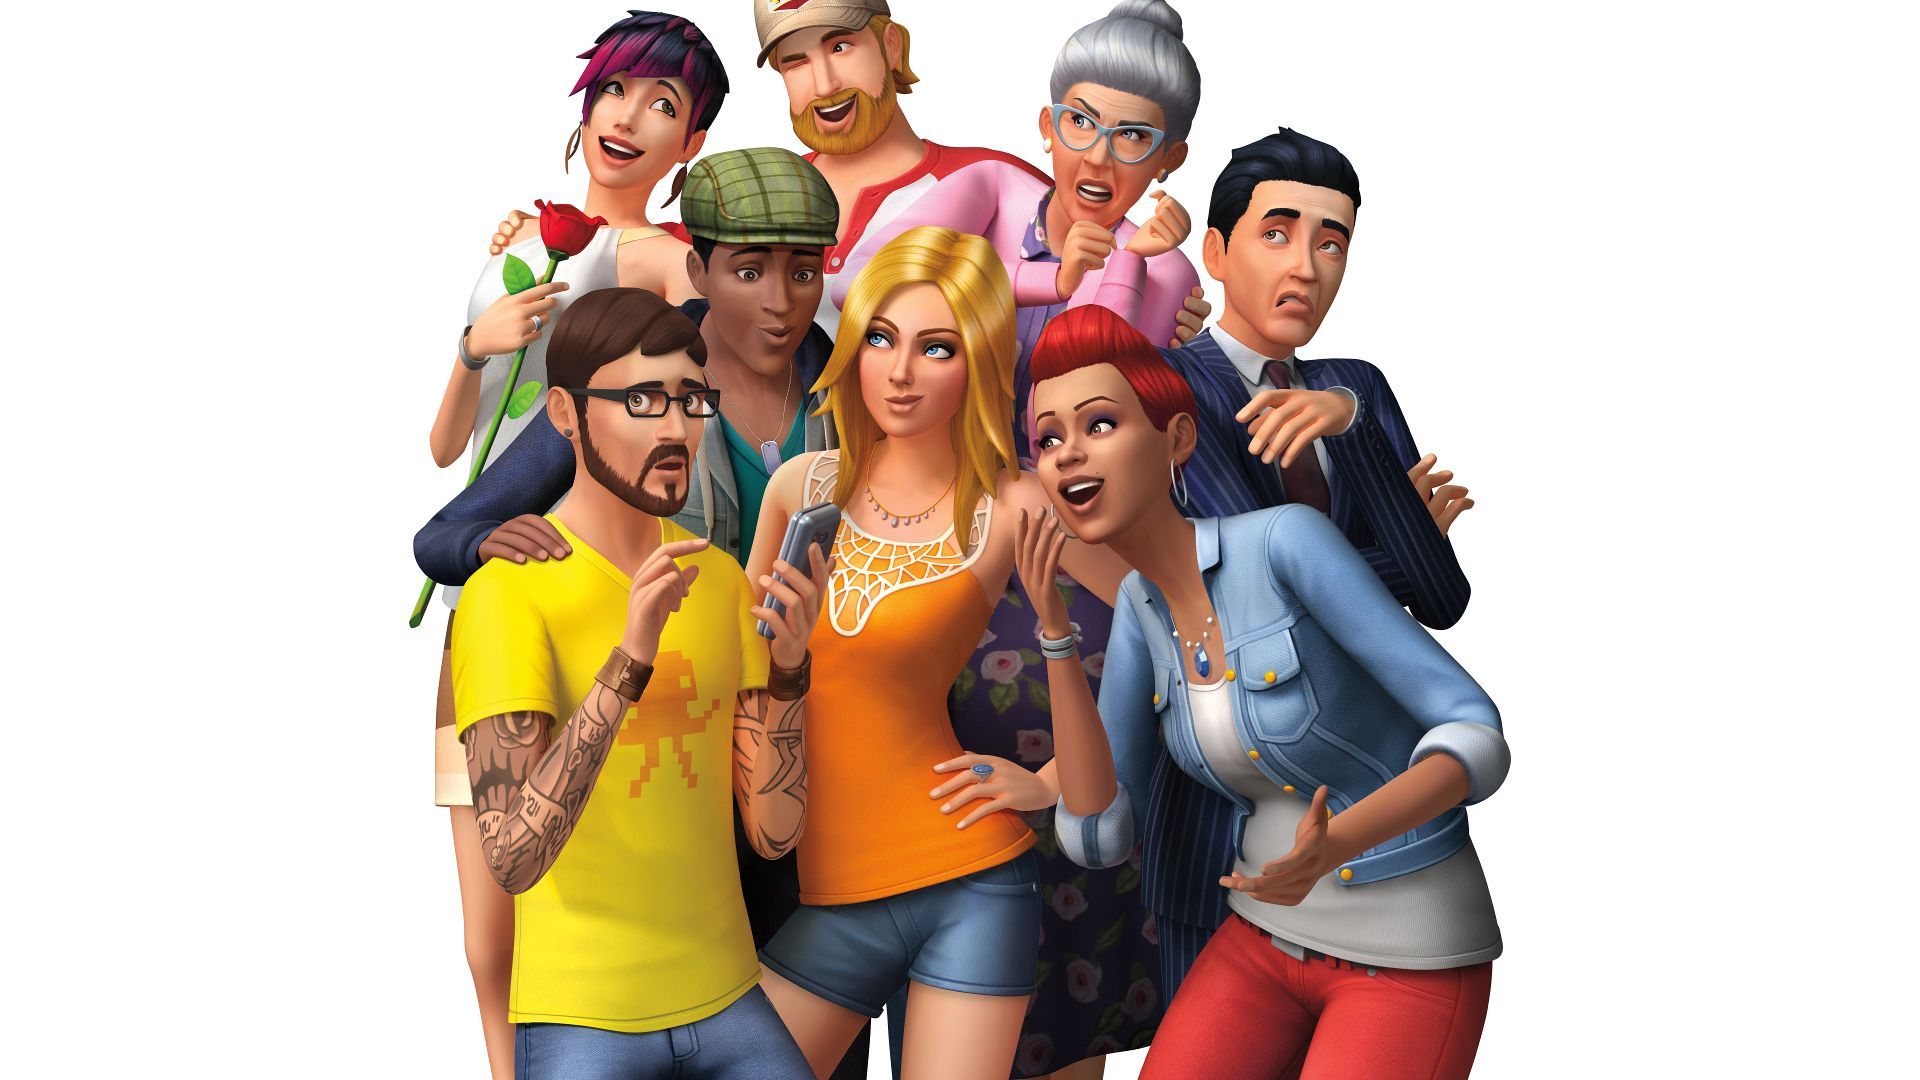 sims 4 expansions